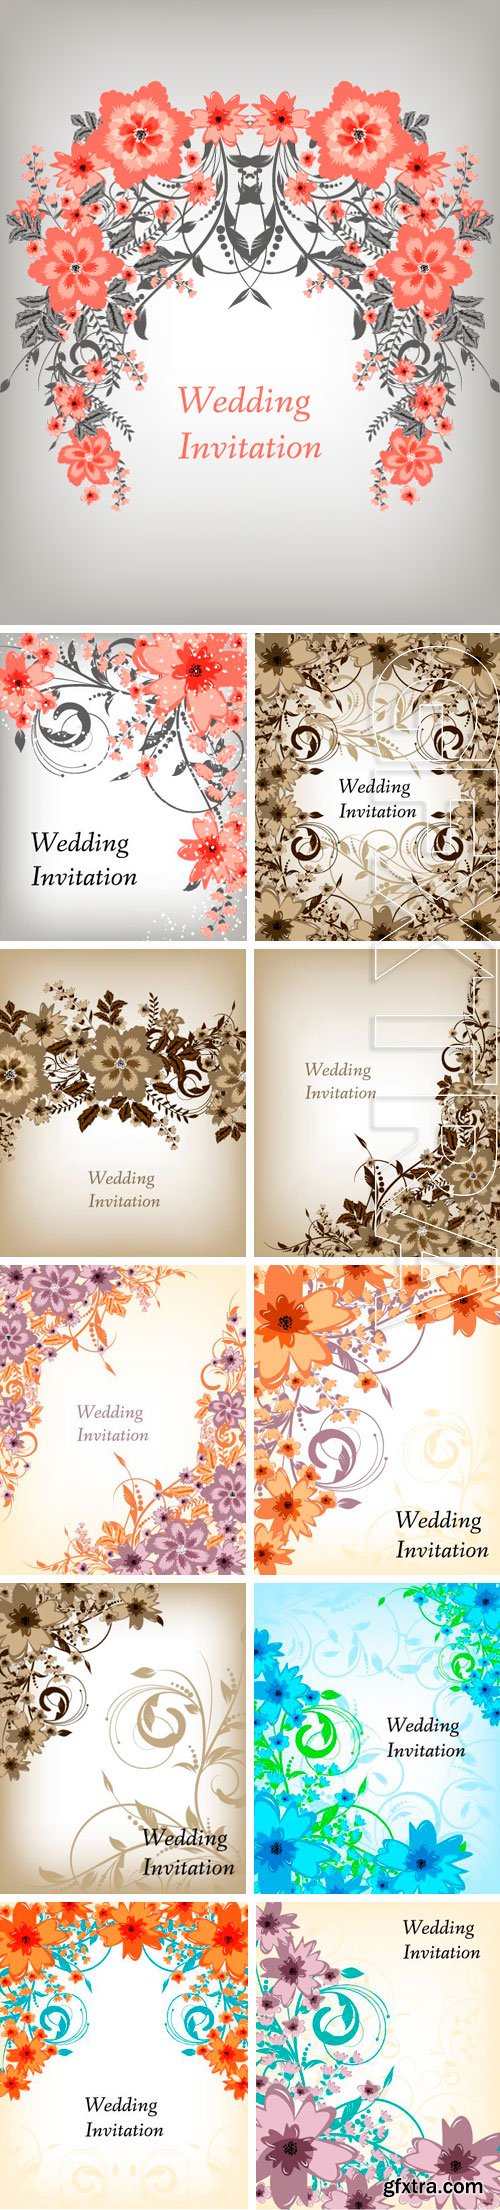 Stock Vectors - Wedding invitation card. Flowers abstract colorful background